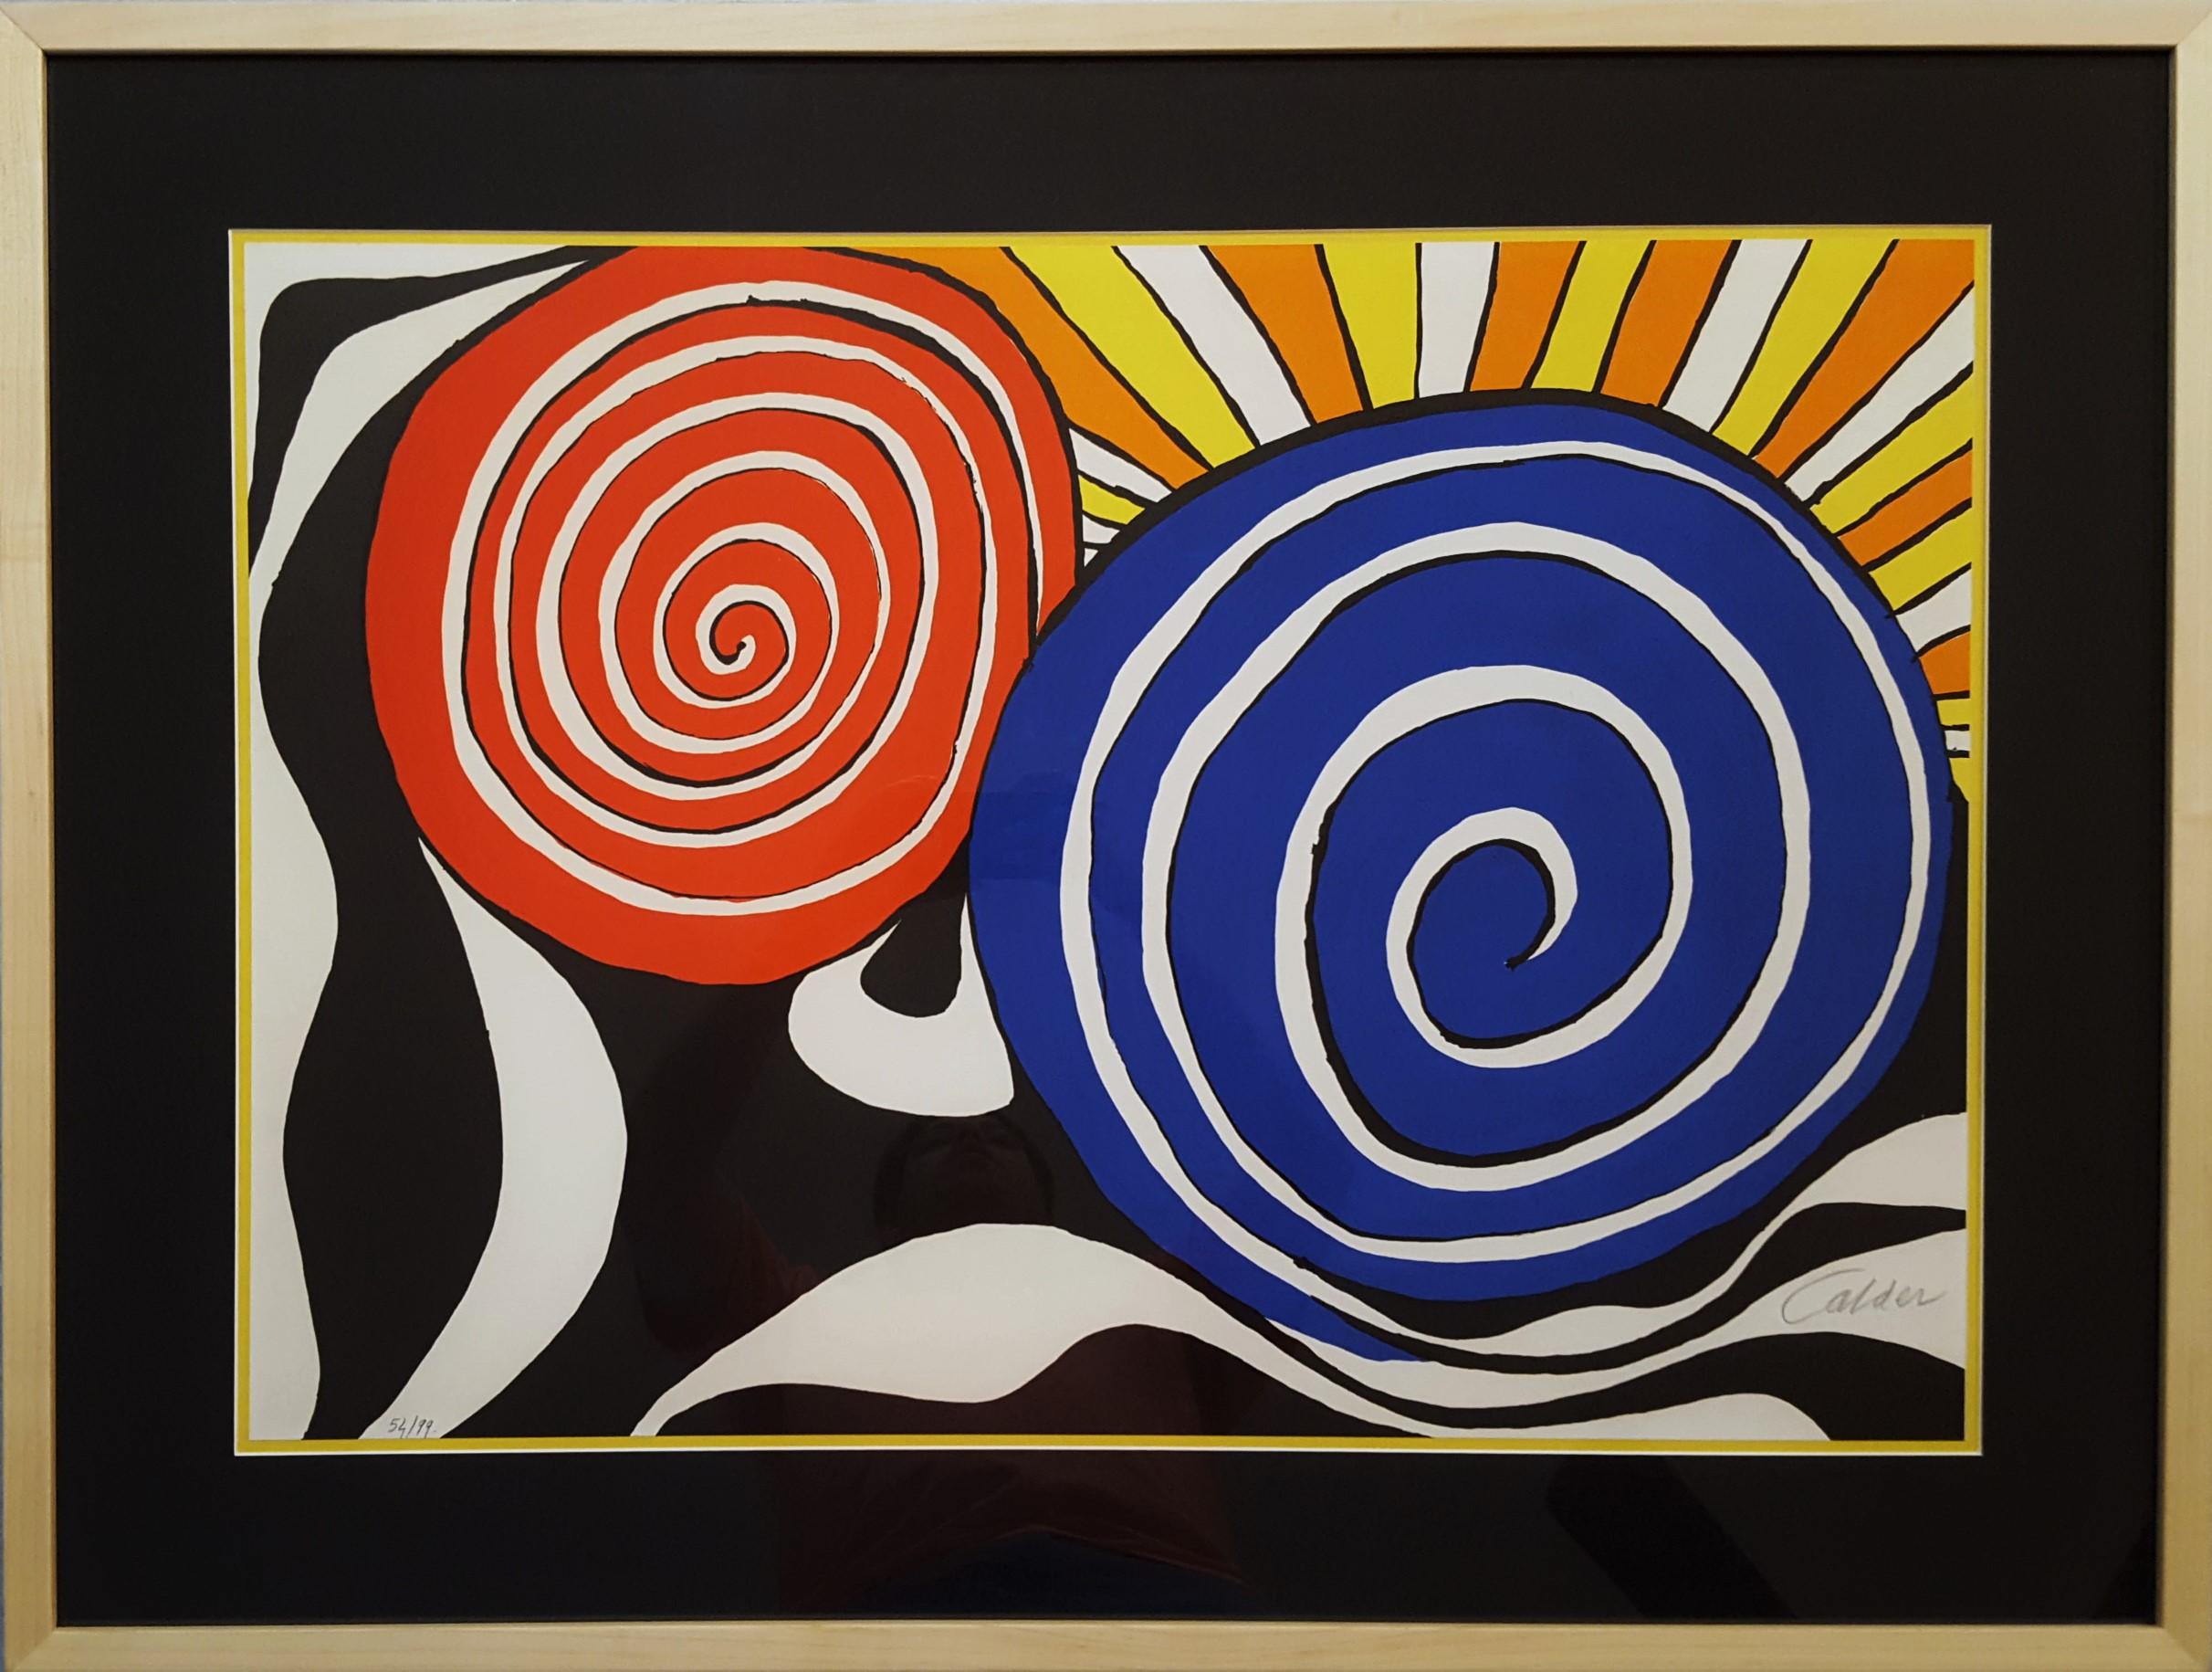 Red and Blue Spirals with Sun - Print by Alexander Calder